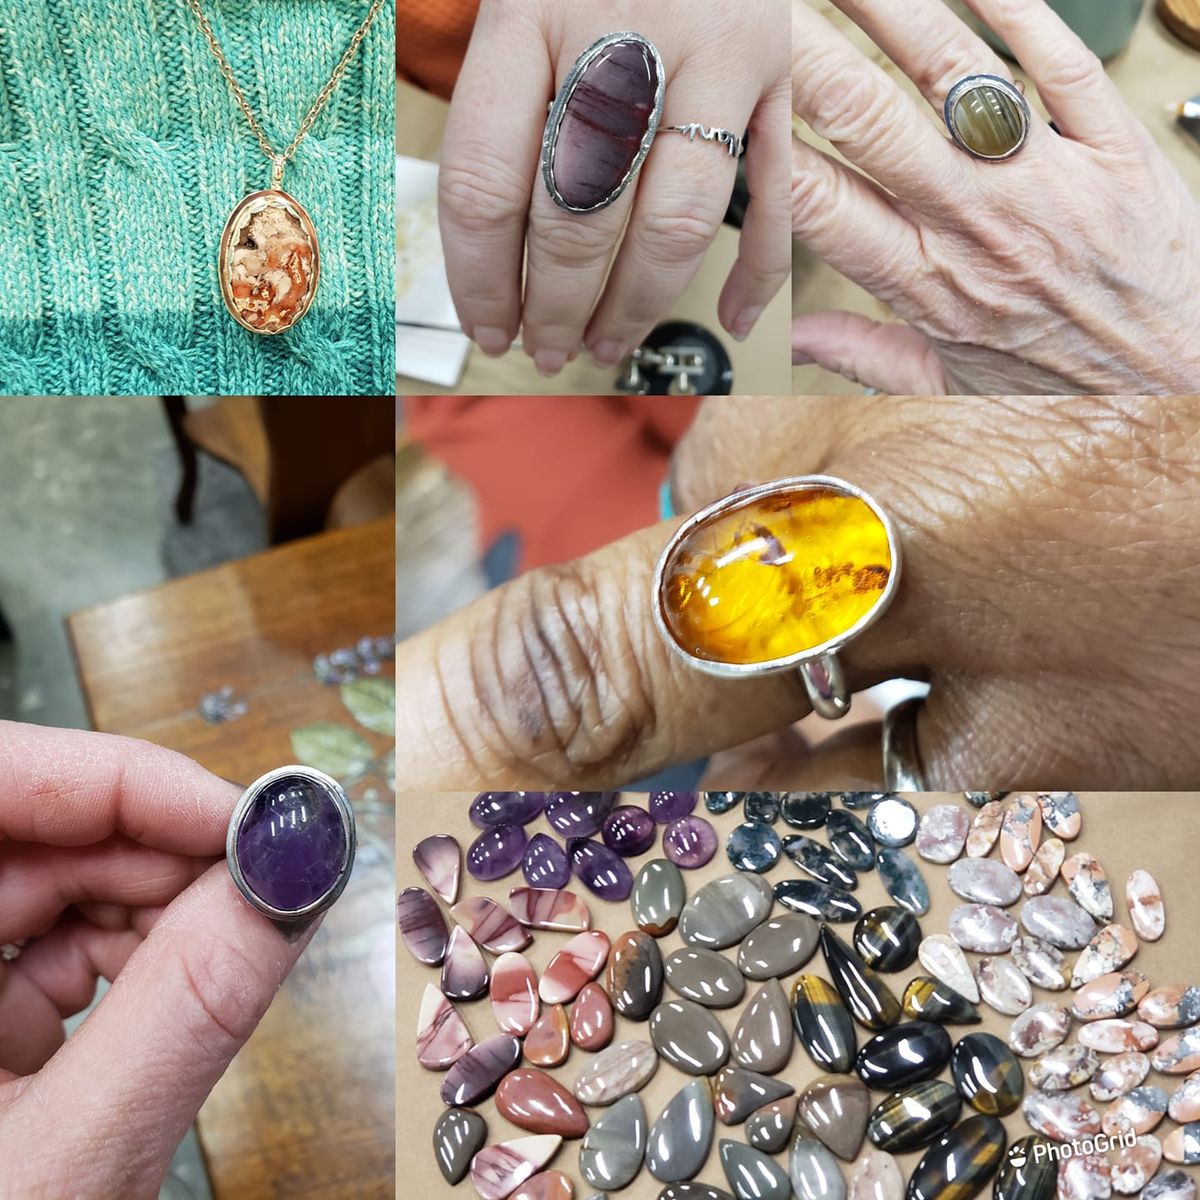 Thursday, July 11th Create a STERLING SILVER GEMSTONE RING or PENDANT